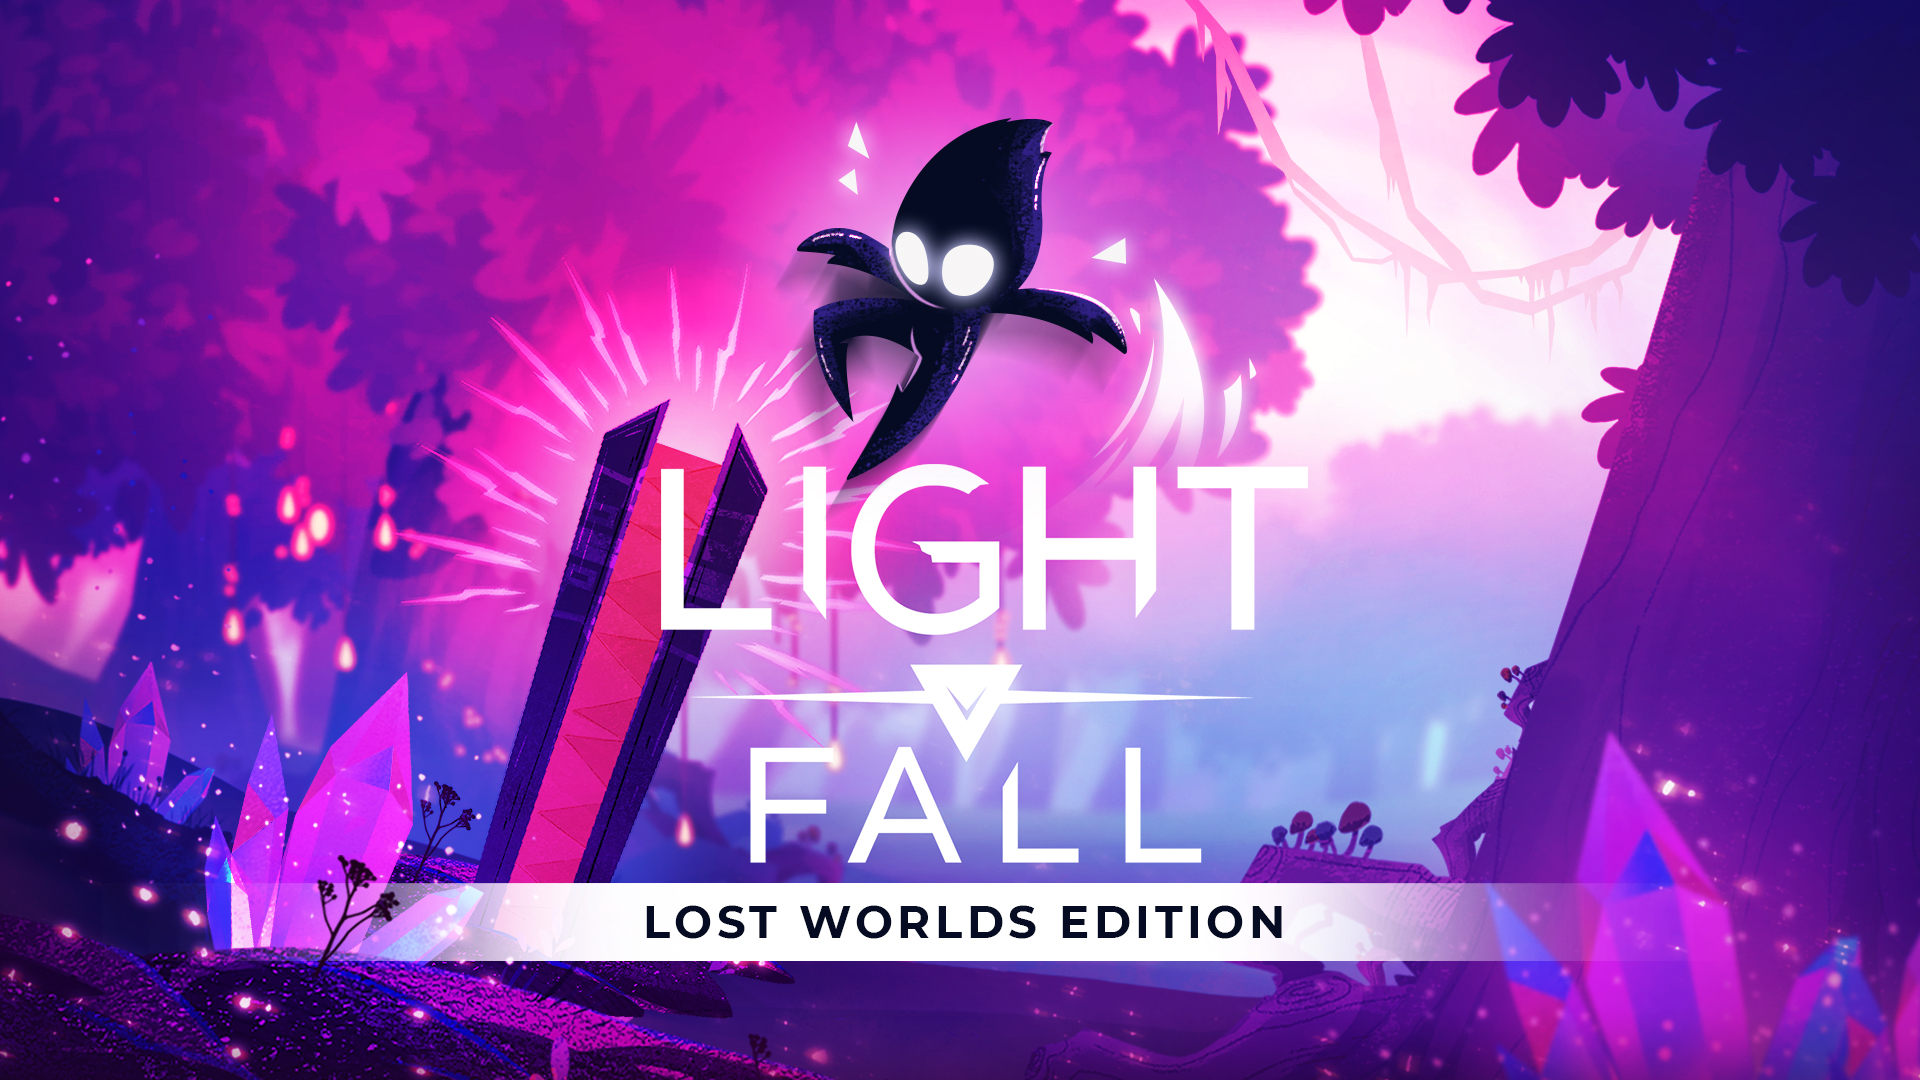 Light Fall: One Year Later